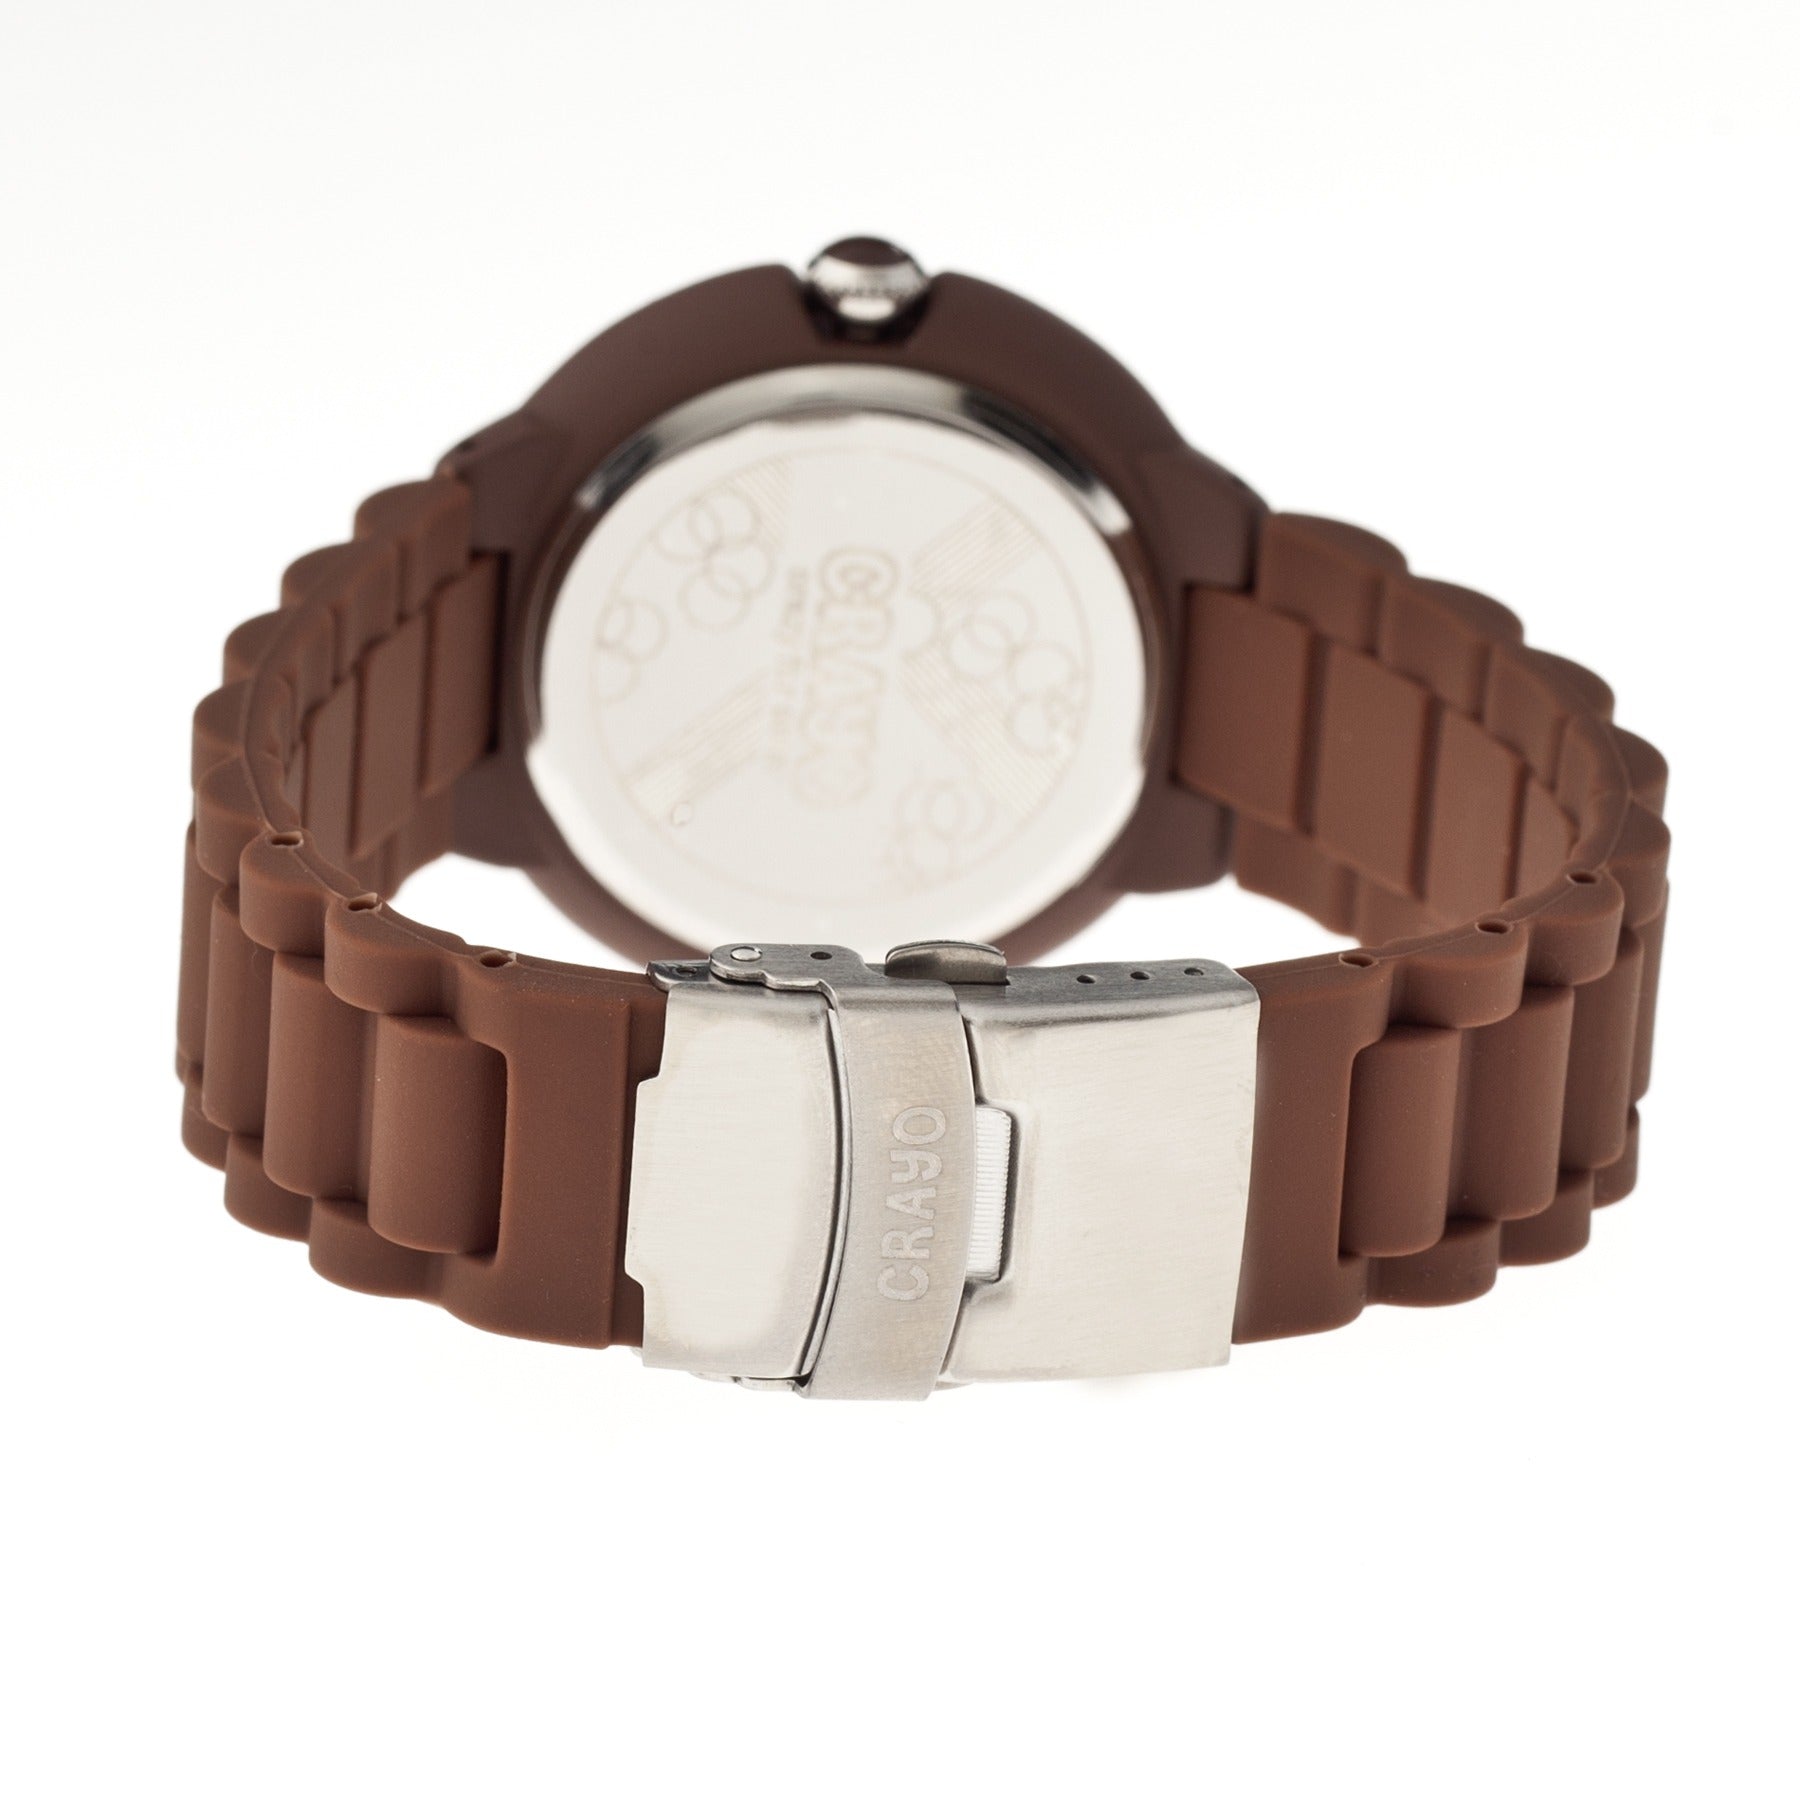 Crayo Muse Unisex Watch w/ Magnified Date - Brown - CRACR1902